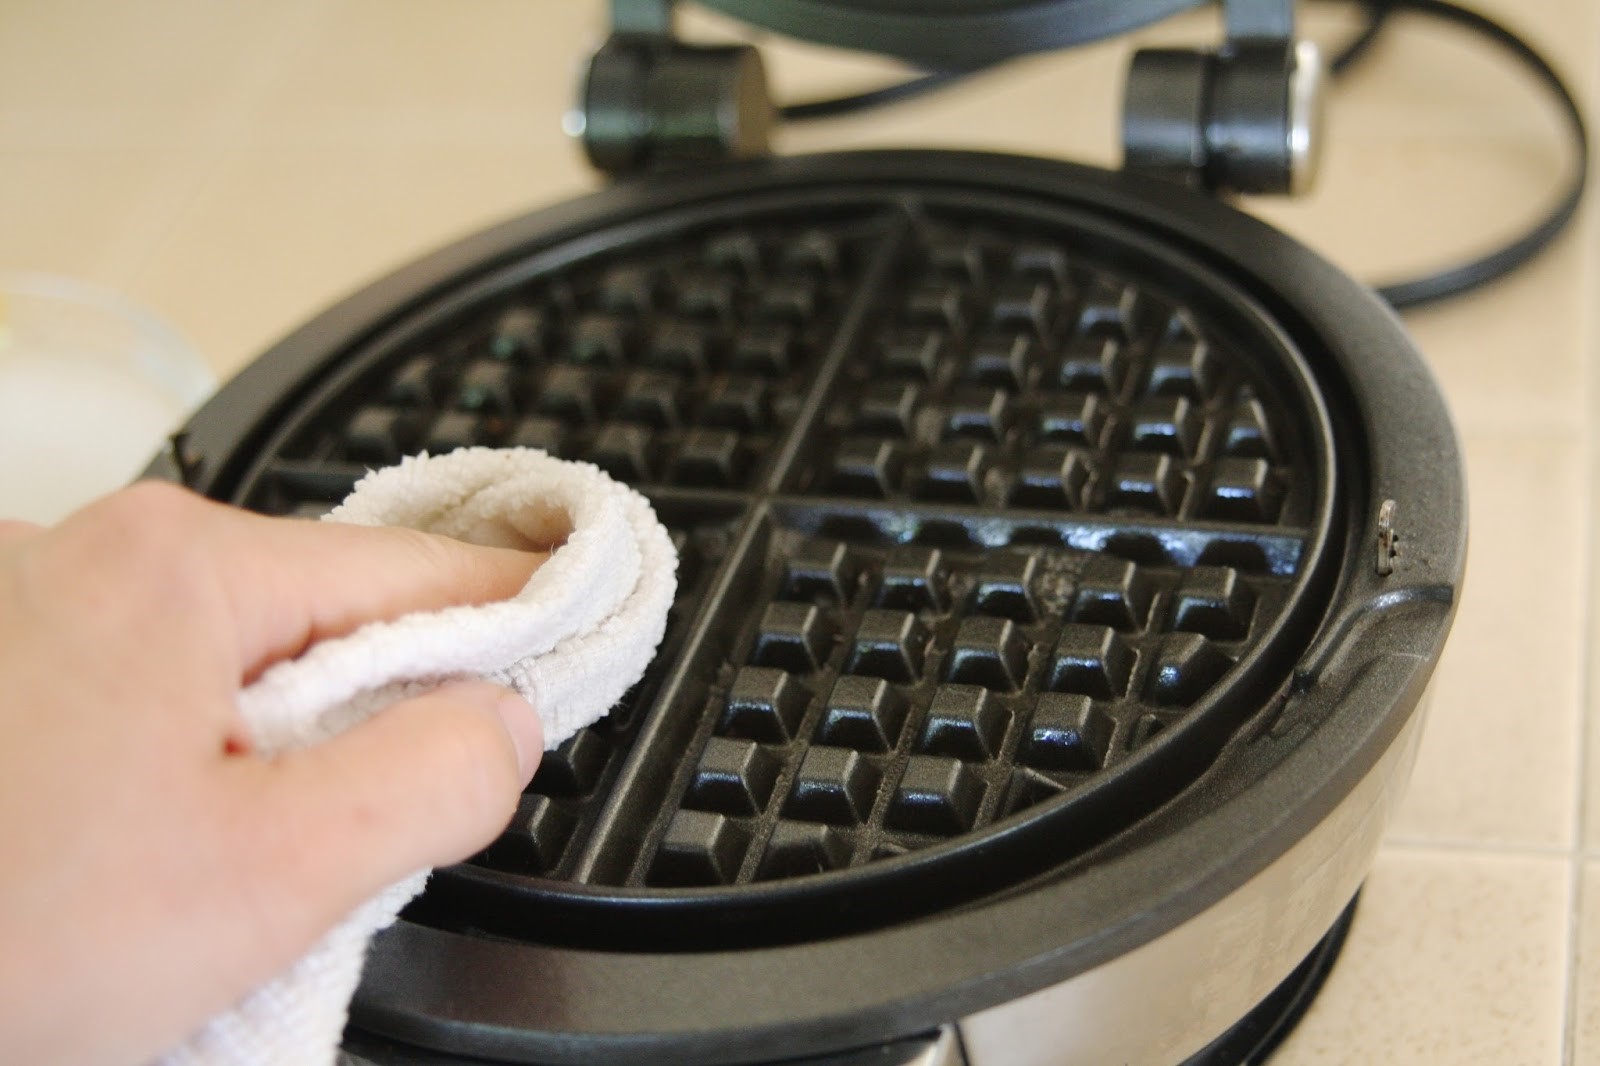 https://storables.com/wp-content/uploads/2023/08/how-to-clean-the-black-stuff-off-the-waffle-iron-1692246487.jpg